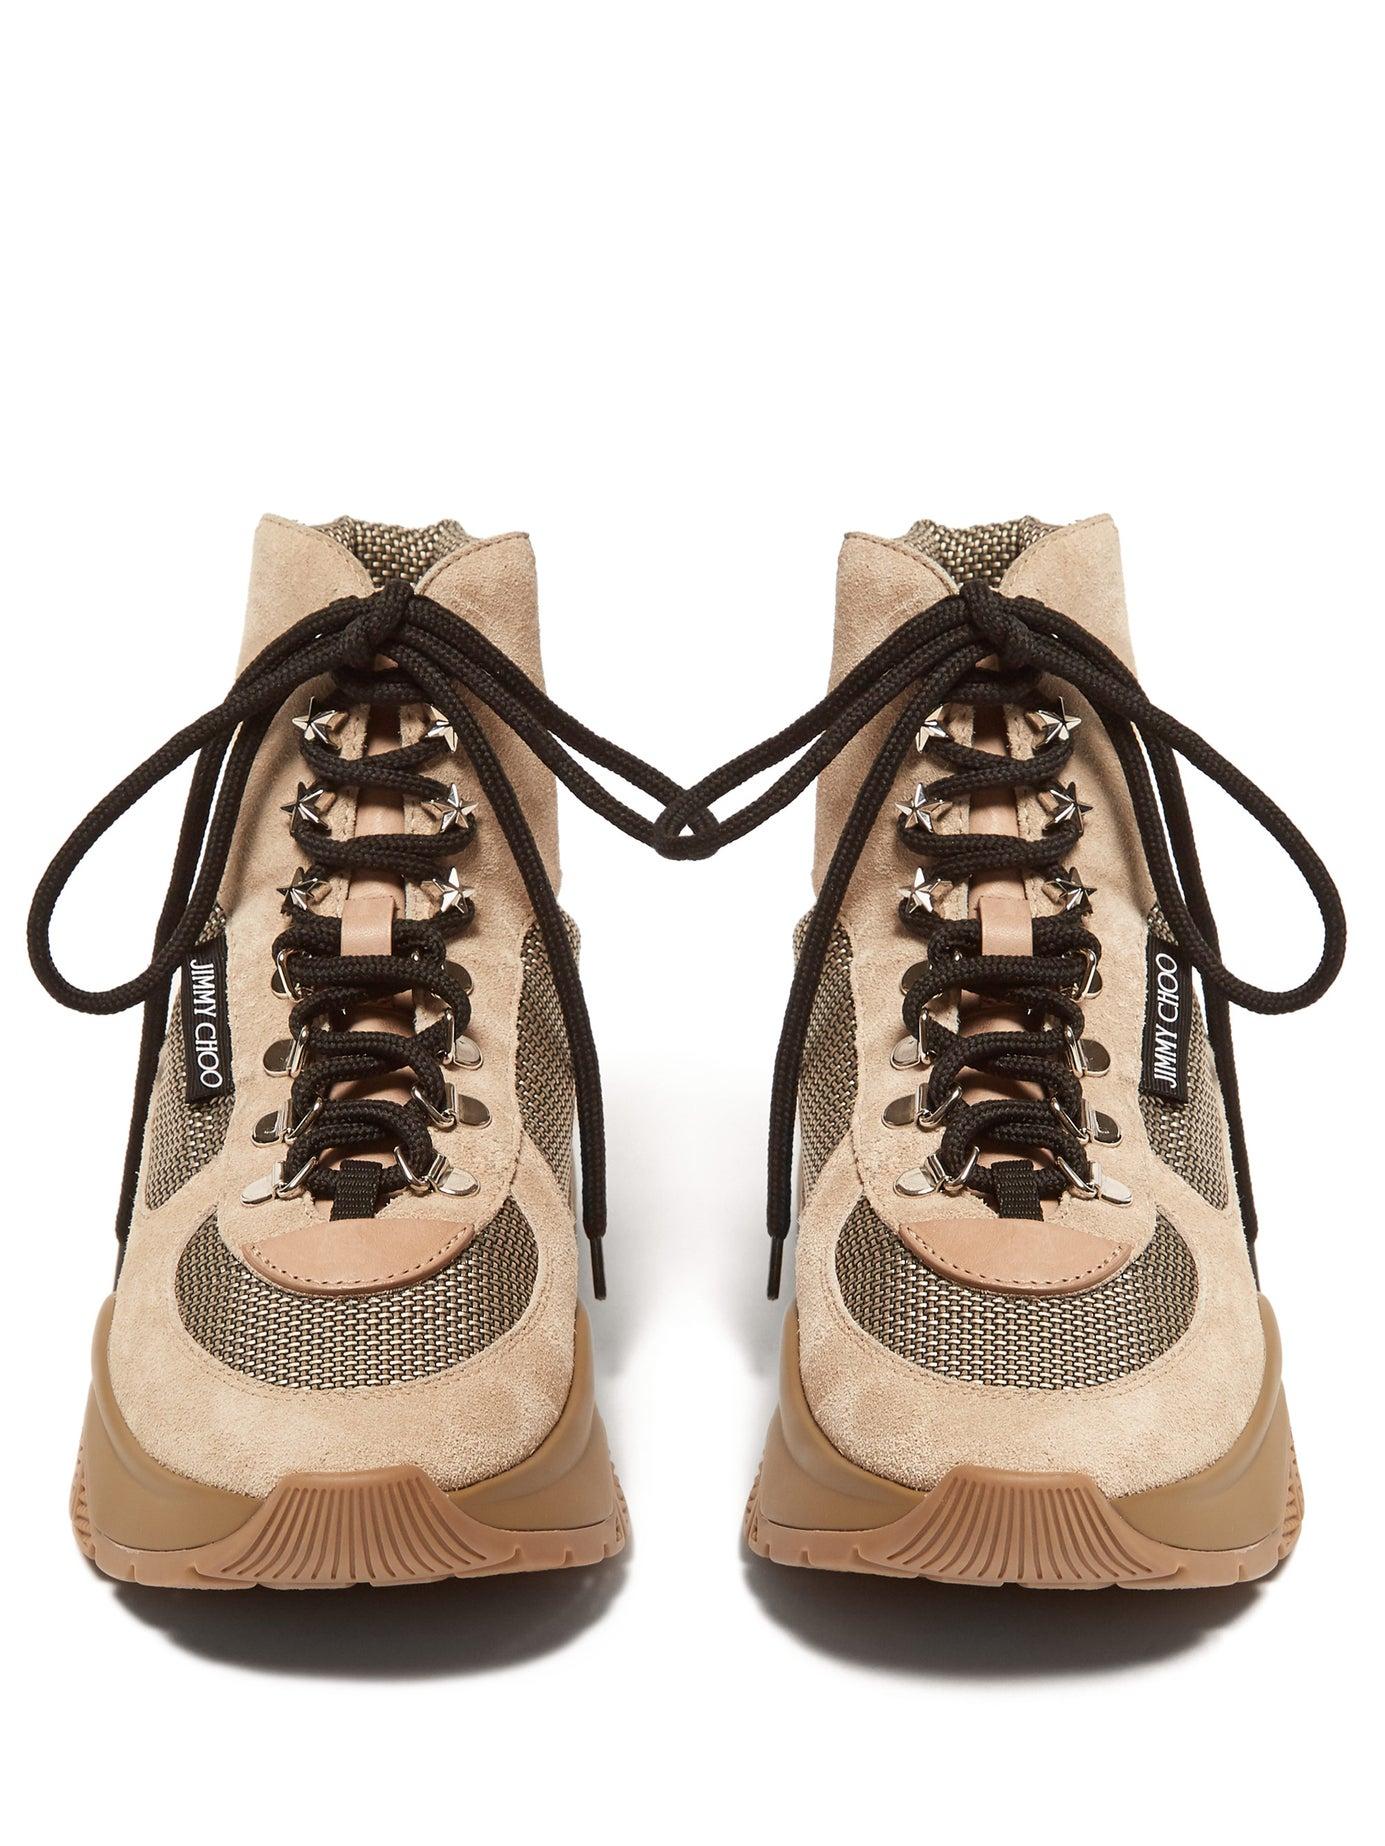 Jimmy Choo Inca Suede Hiking Boots - Lyst